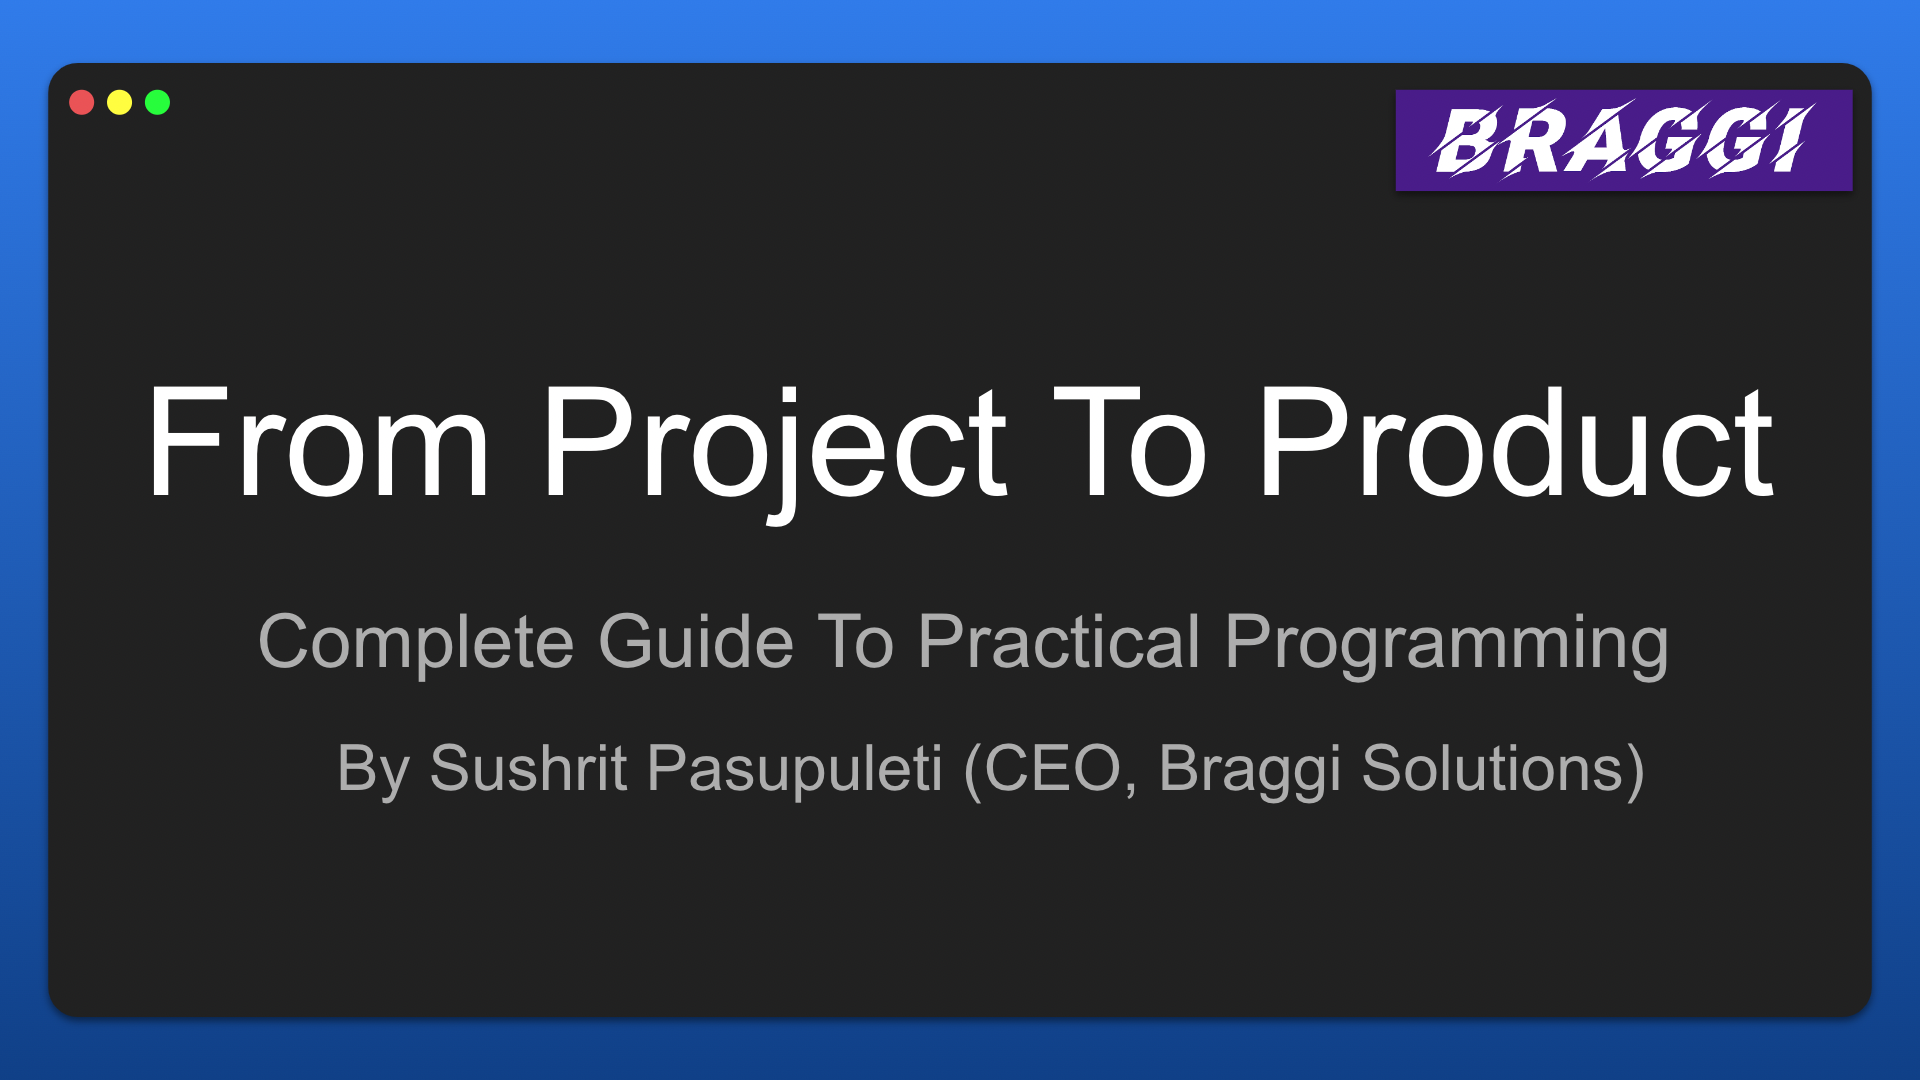 From Project To Product - The Complete Guide To Practical Programming - Webinar for KL University